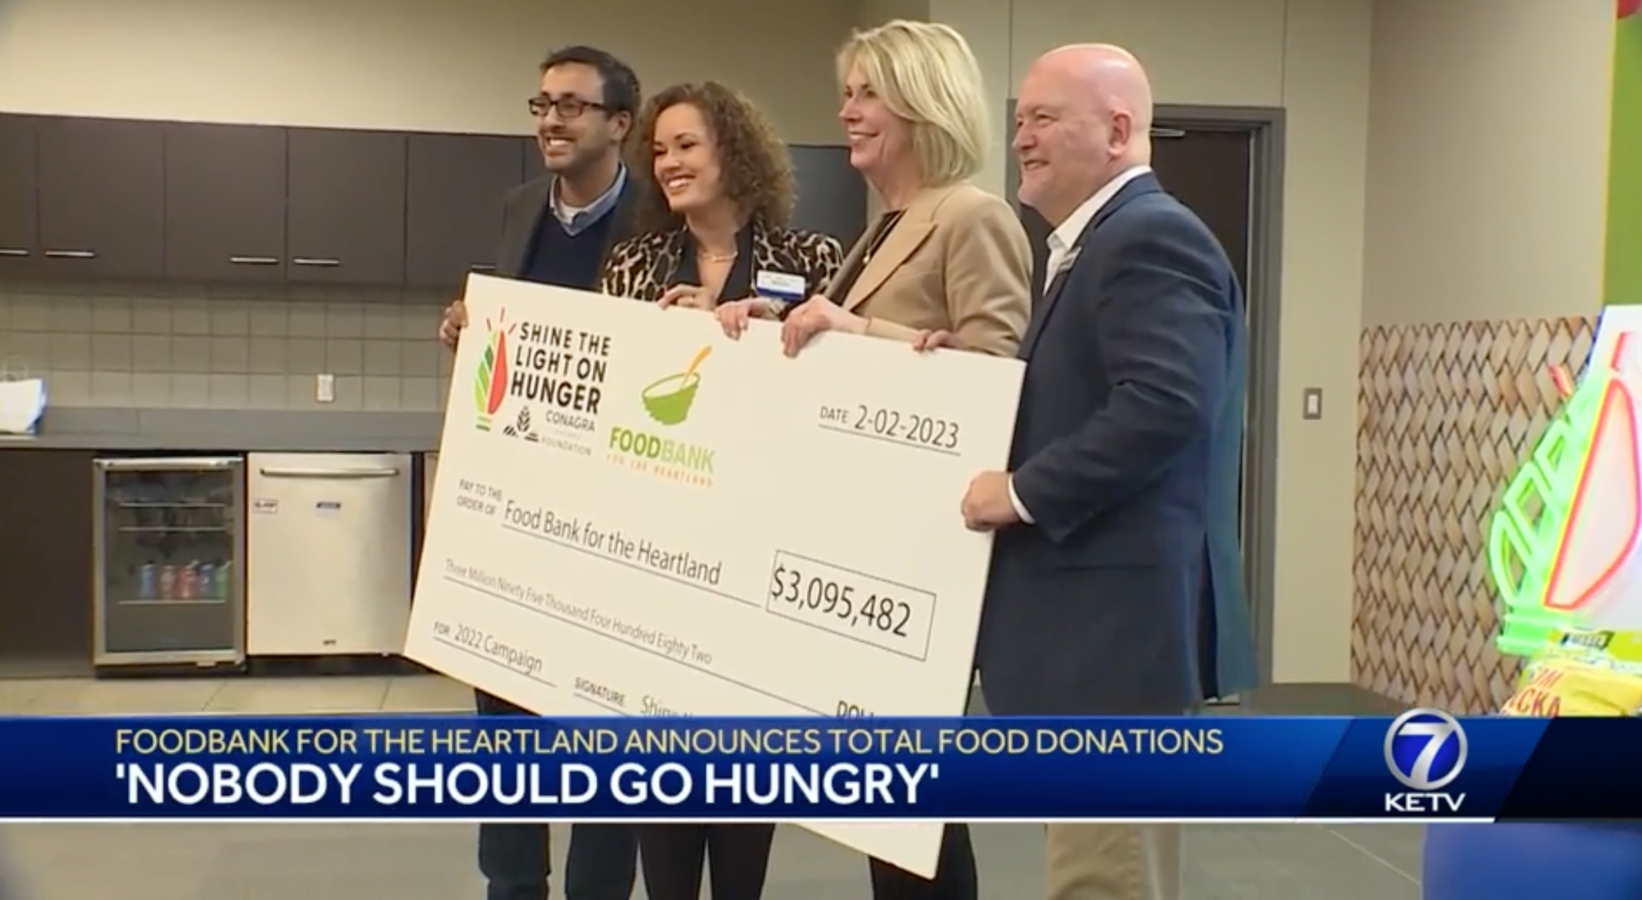 Photo from KETV of Conagra Brands and Baker's representatives, Mayor Stothert, and Brian Barks